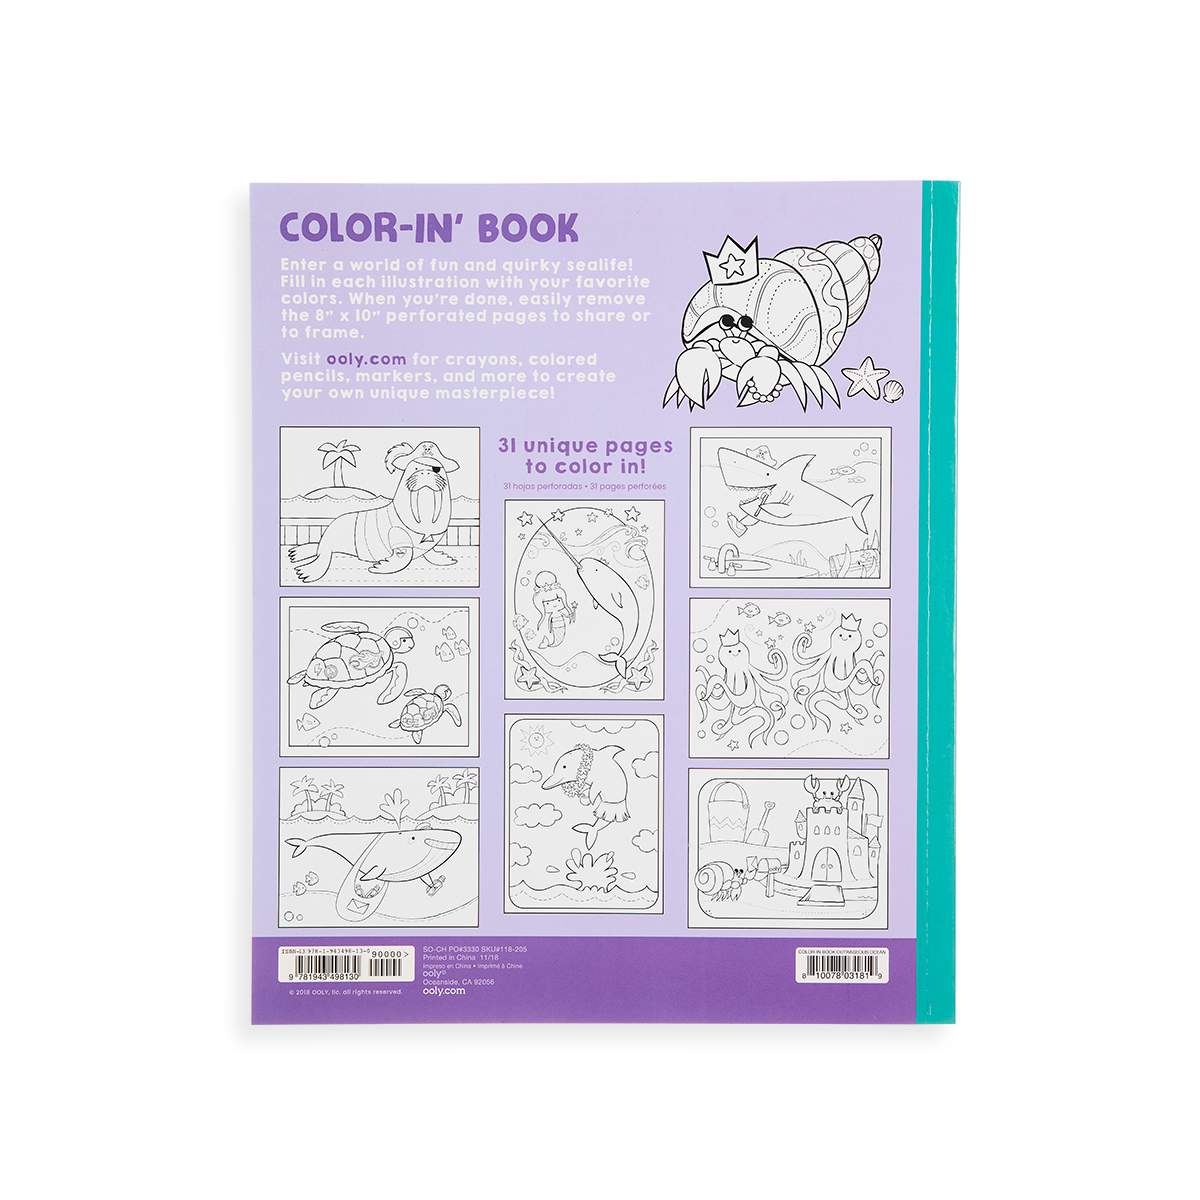 Ooly Toys Outrageous Ocean Colouring Book